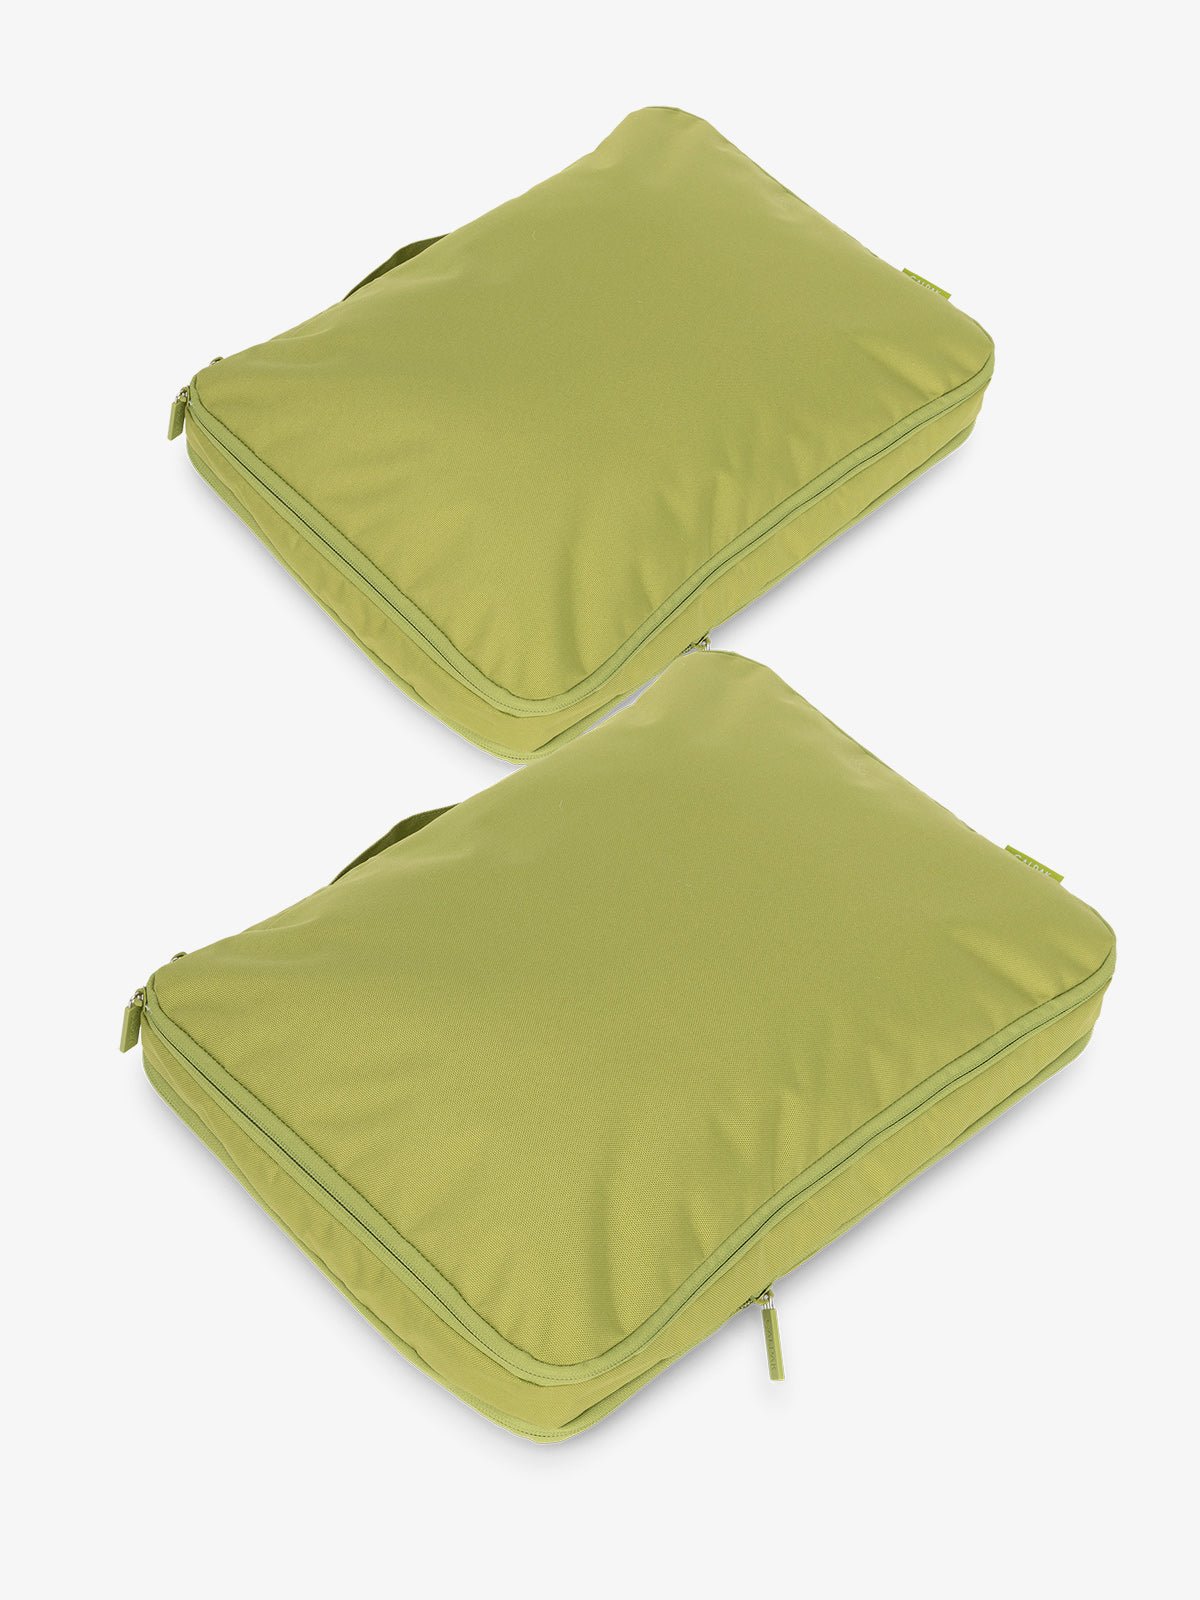 CALPAK Large Compression Packing Cubes in palm